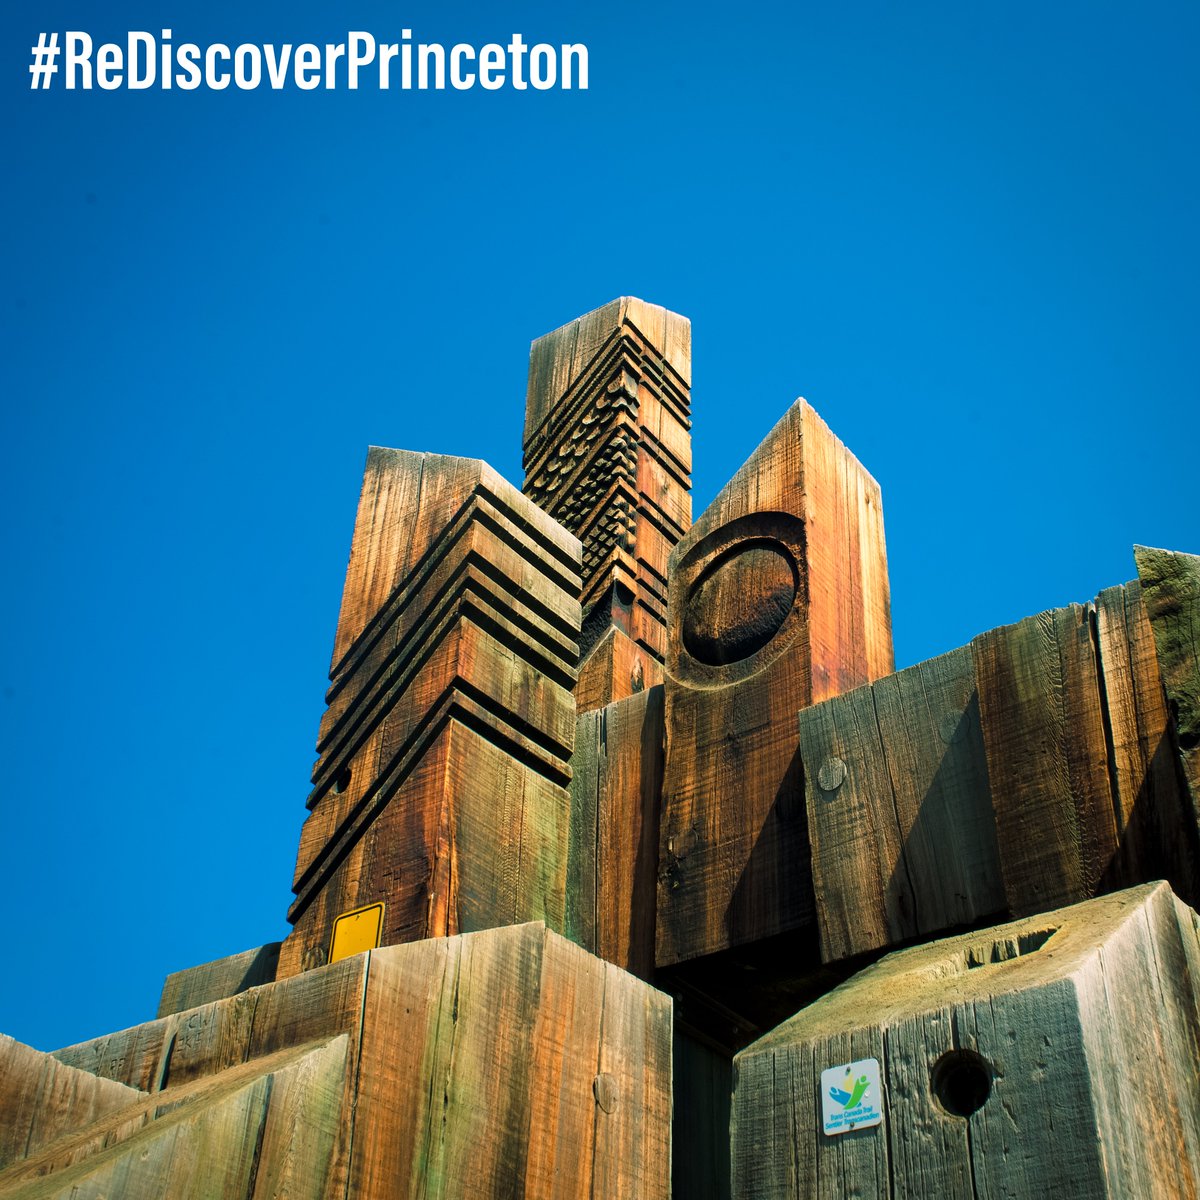 🇨🇦Check out Phifers Fountain on the Trans-Canada Trail, in Princeton B.C. It is one of the widest wooden sculptures in B.C. Built of Seventy-four upright cedar blocks, 3'x3' each by varying heights from 2' to 17' and each set in a 6' base. 📸👏

#rediscoverprinceton #princeton